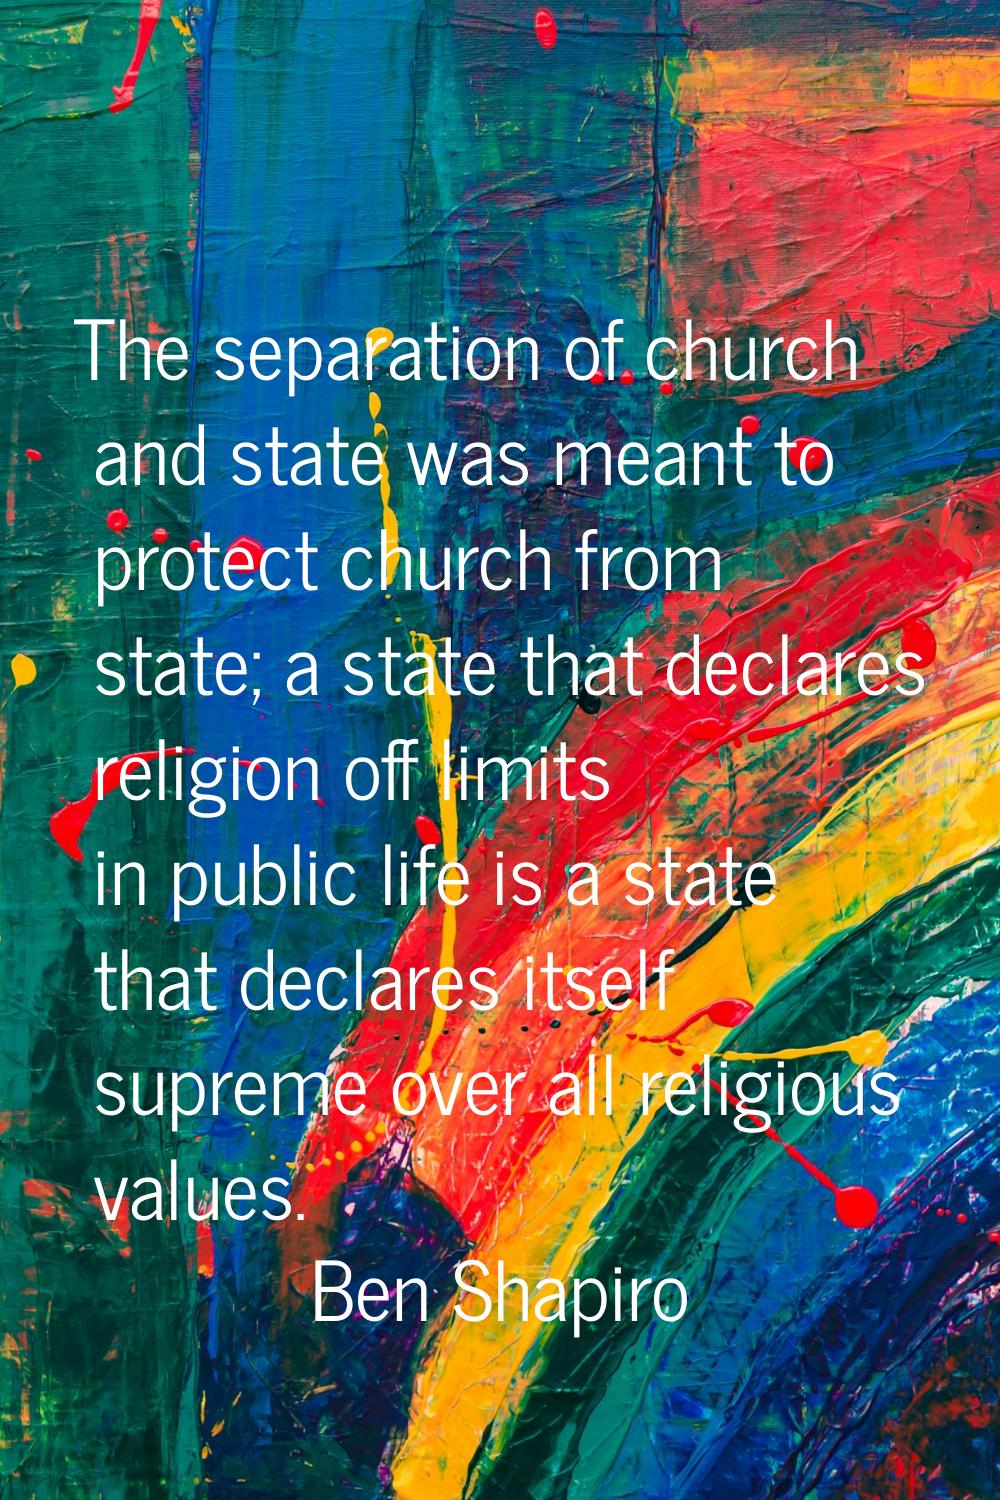 The separation of church and state was meant to protect church from state; a state that declares re